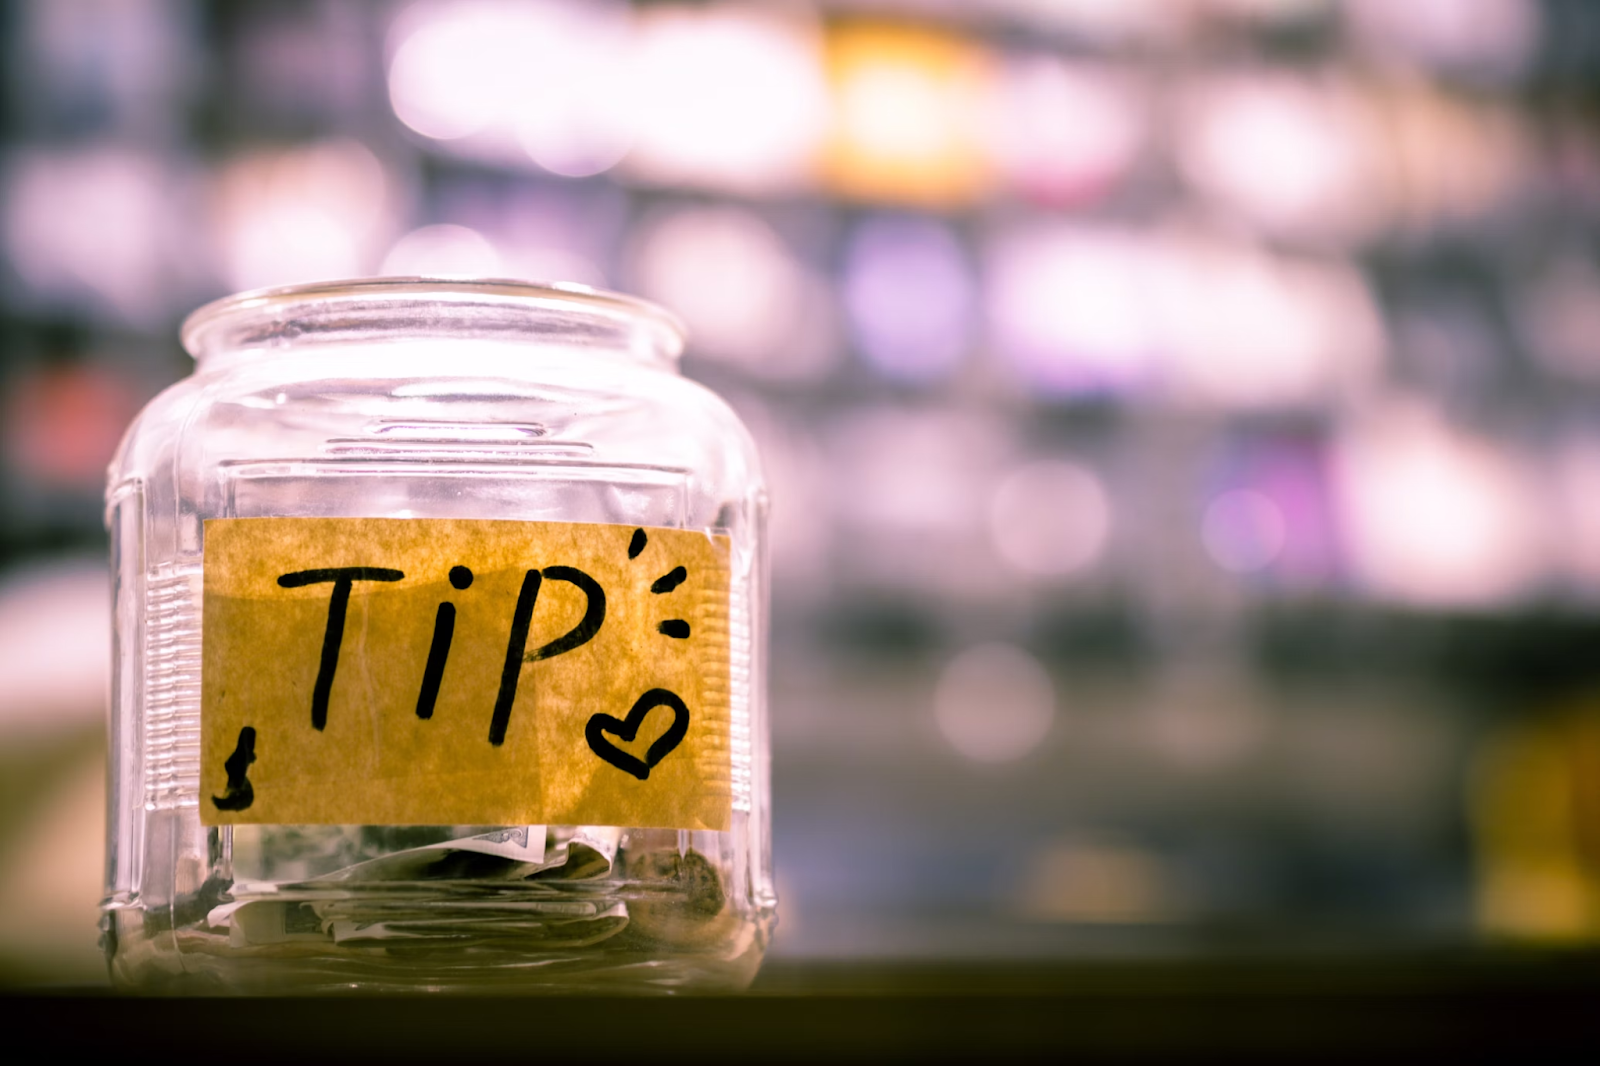 Clear glass jar with sticky note that has the word "TIP" written on it